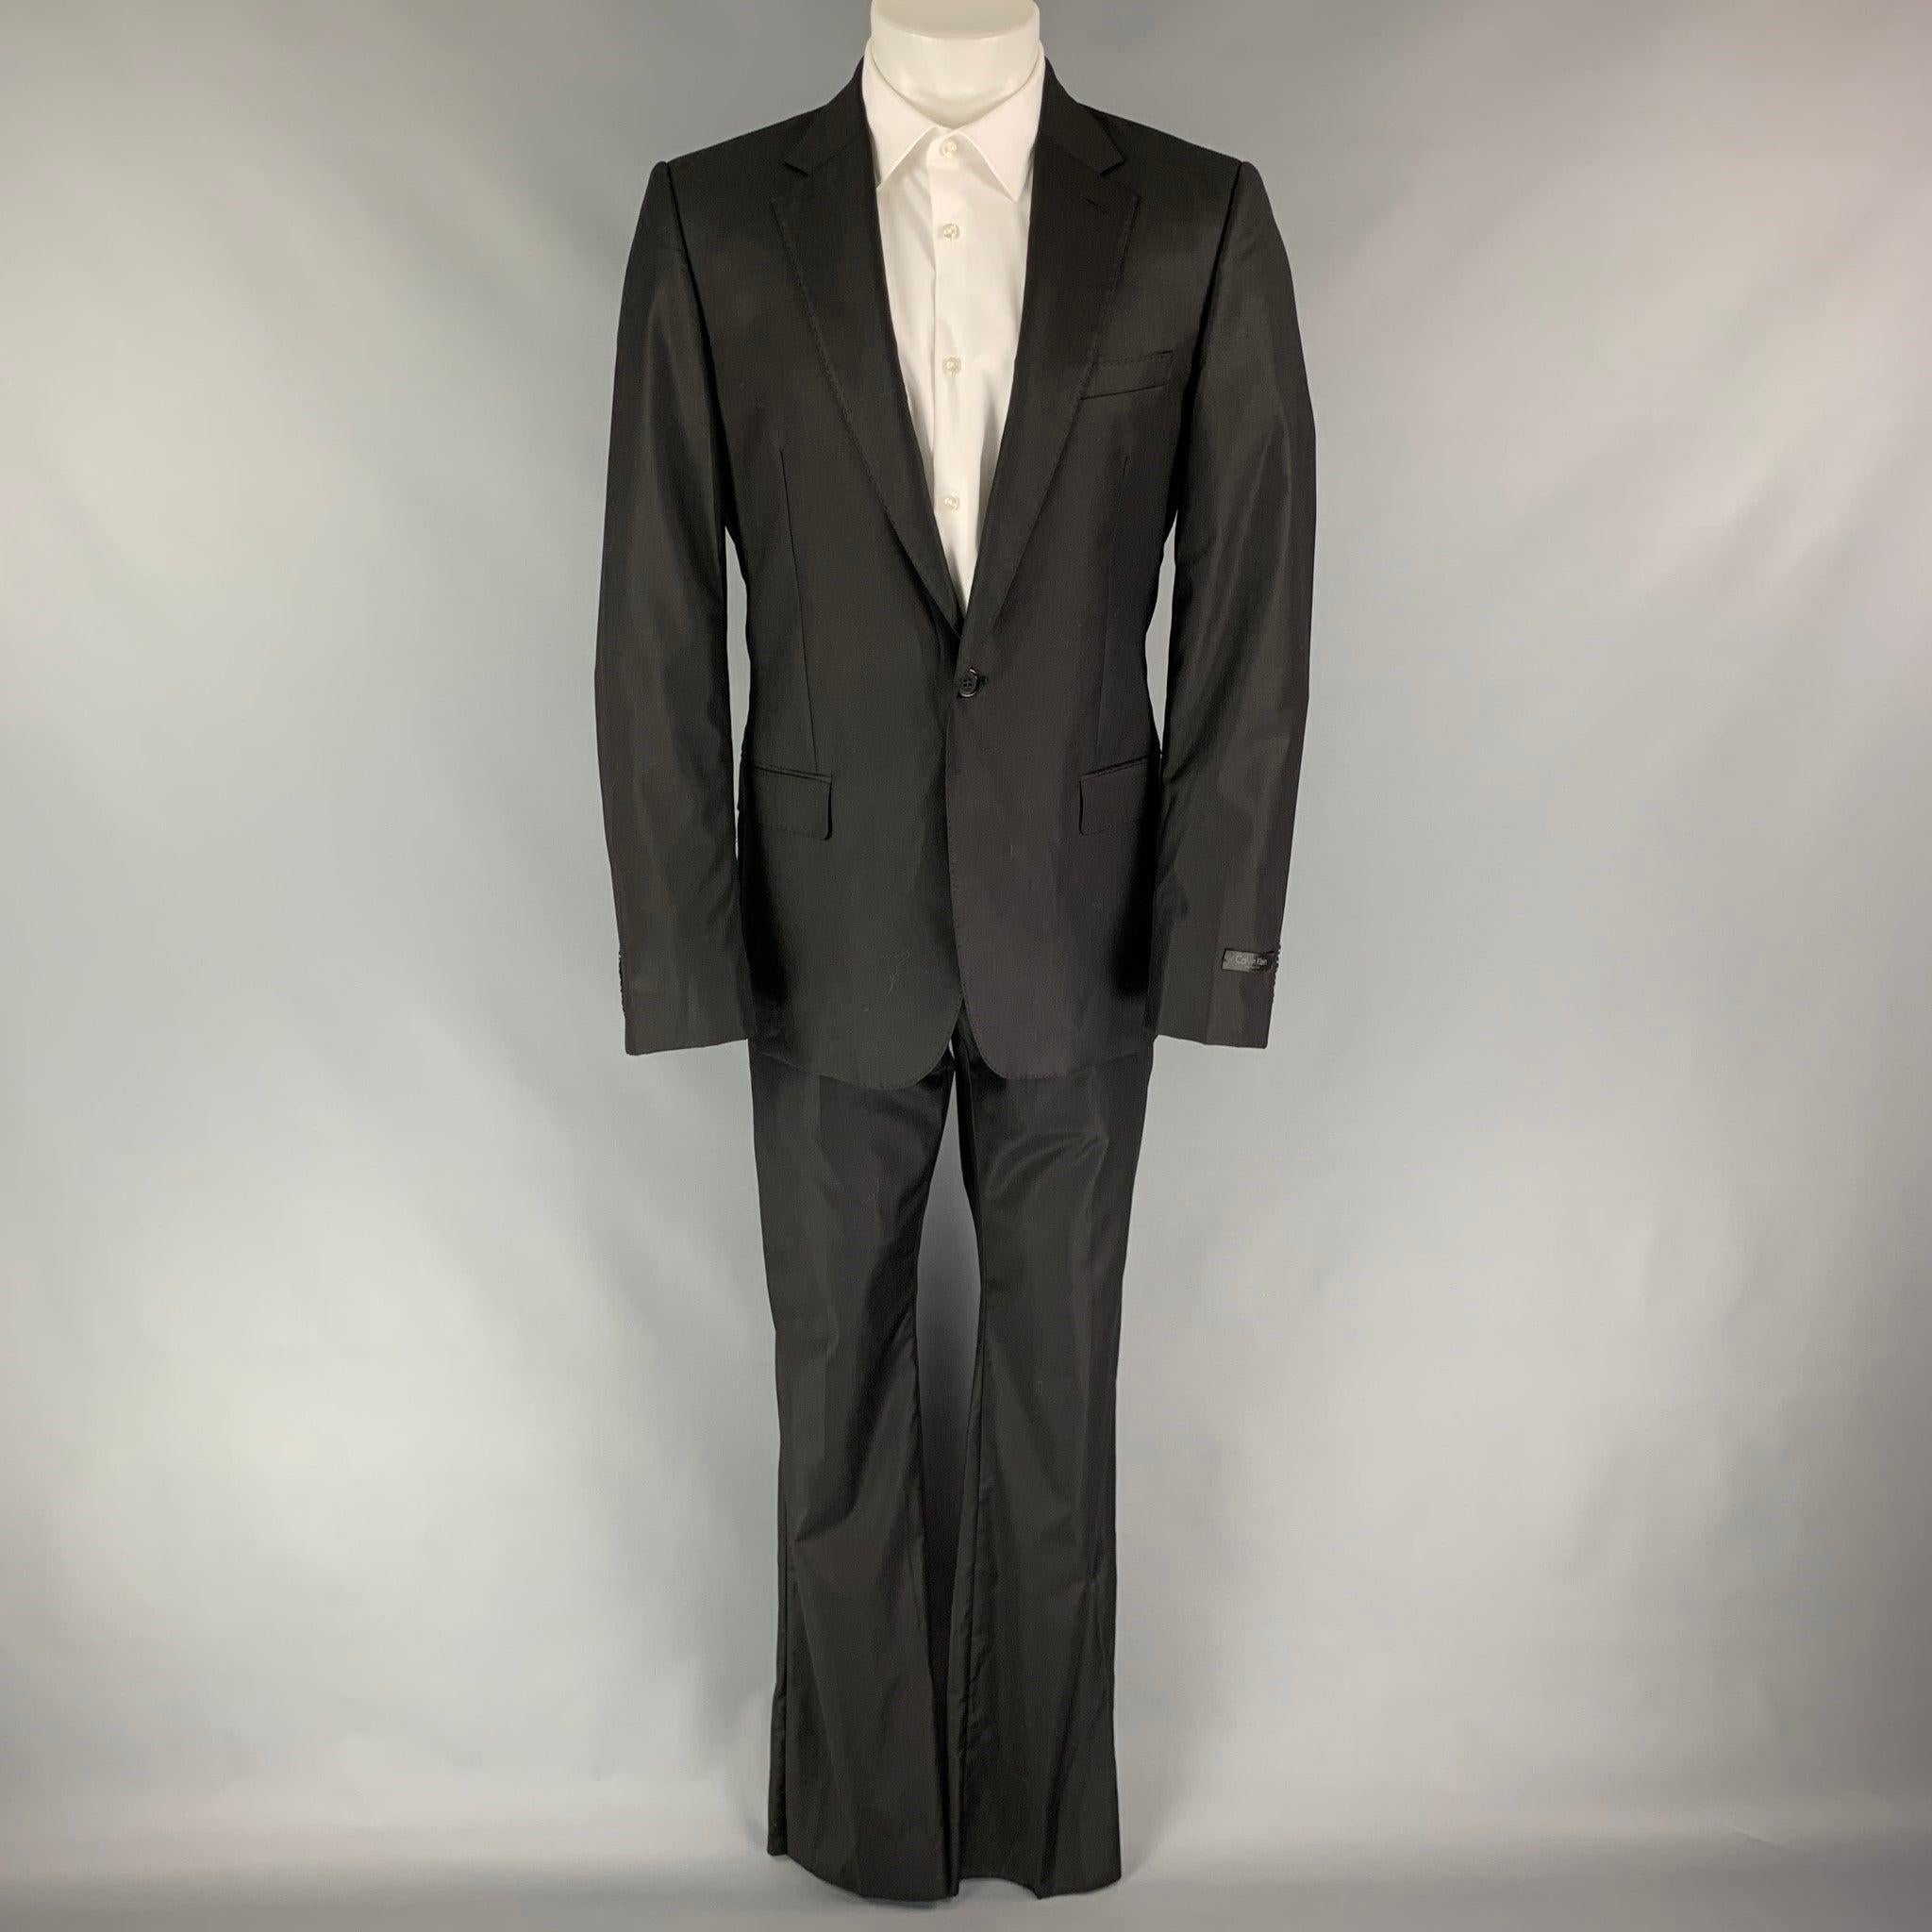 CALVIN KLEIN COLLECTION
 suit comes in a black wool with a full liner and includes a single breasted, single button sport coat with a notch lapel and matching flat front trousers. Excellent Pre-Owned Condition. 
 

 Marked:  48/38 
 

 Measurements: